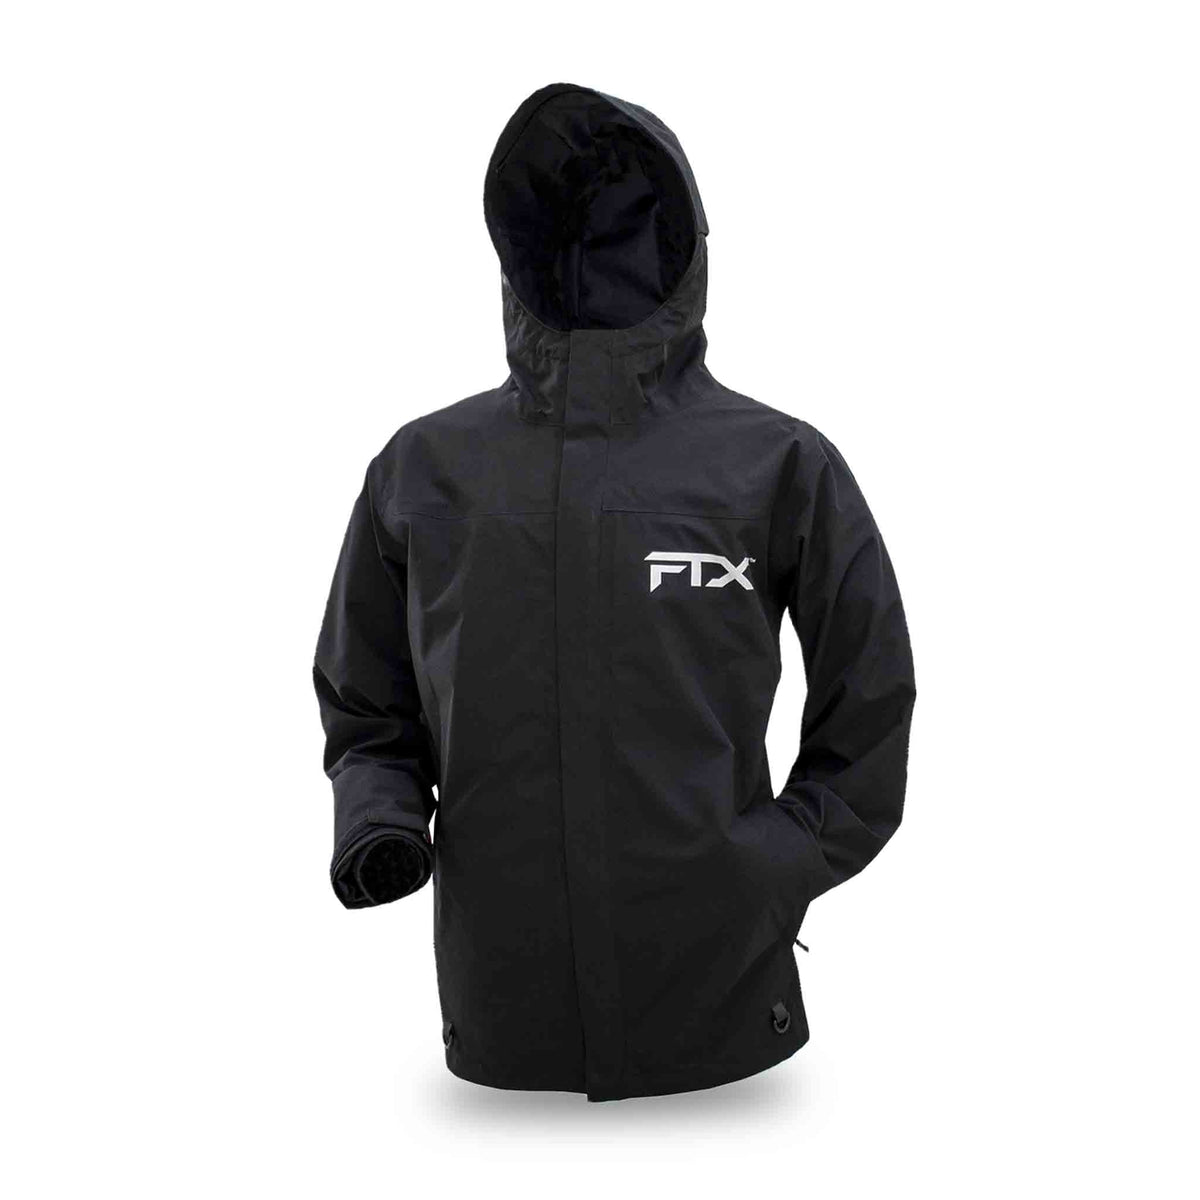 Frogg Toggs FTX Armor Jacket Black M Jackets